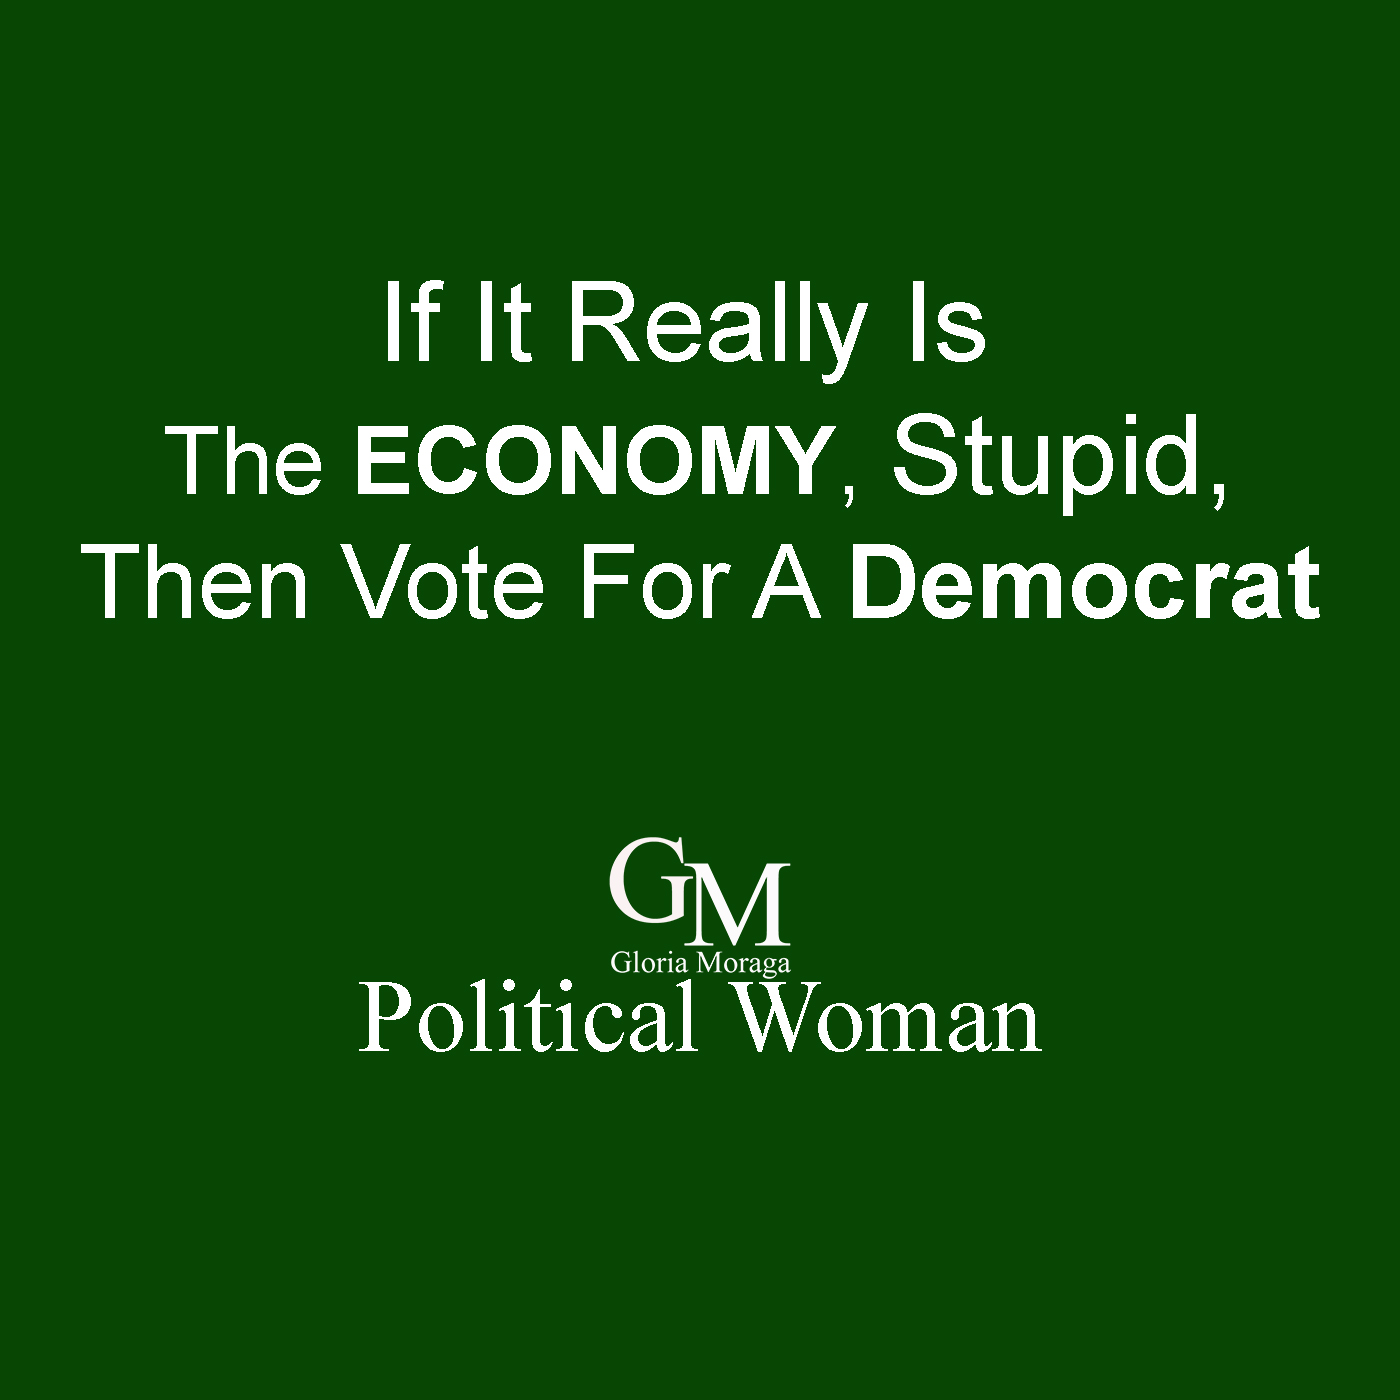 If it really is the Econony Stupid then Vote for a Democrat